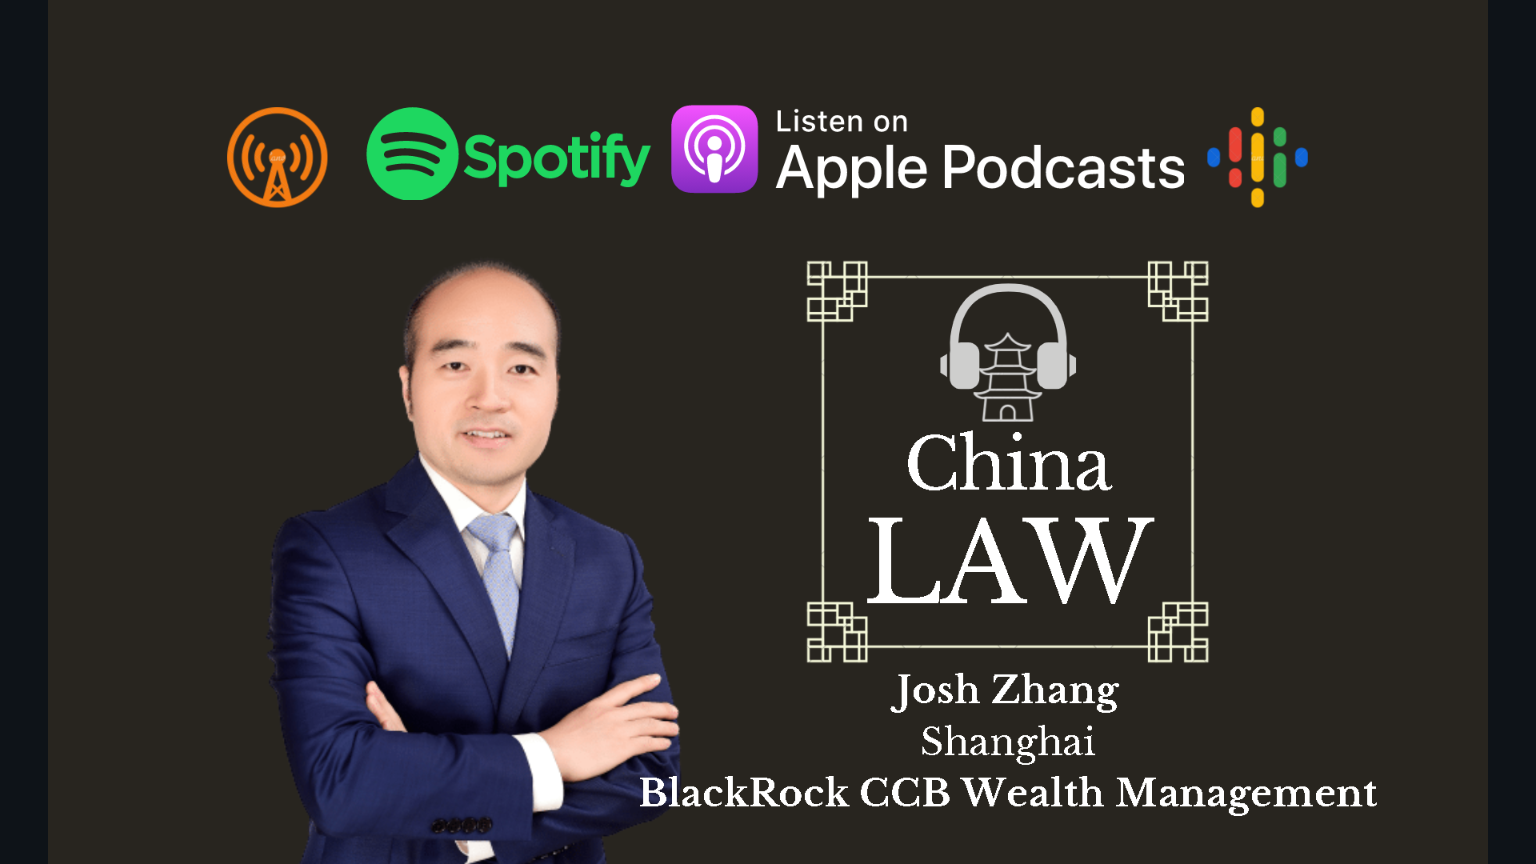 Podcast #35: Tapping into China's Wealth Management Boom - Josh Zhang, BlackRock CCB